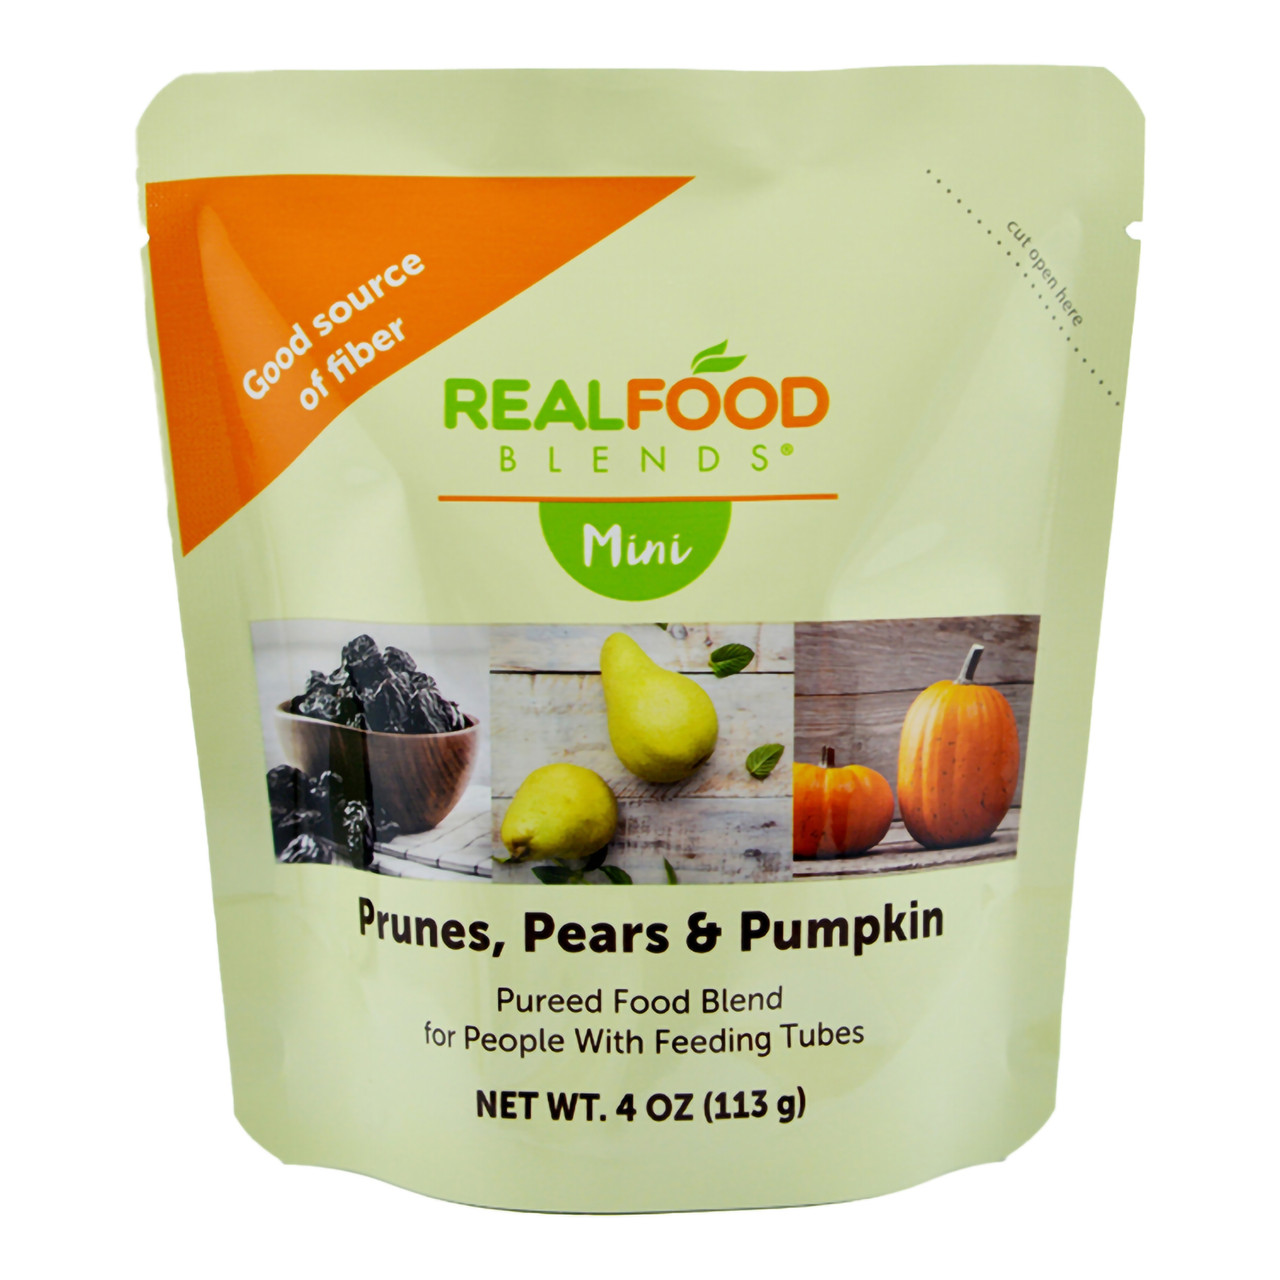 Real Food Blends Tube Feeding Formula Meal Nutritional Supplement - 9.4 oz  (267g) Pouch